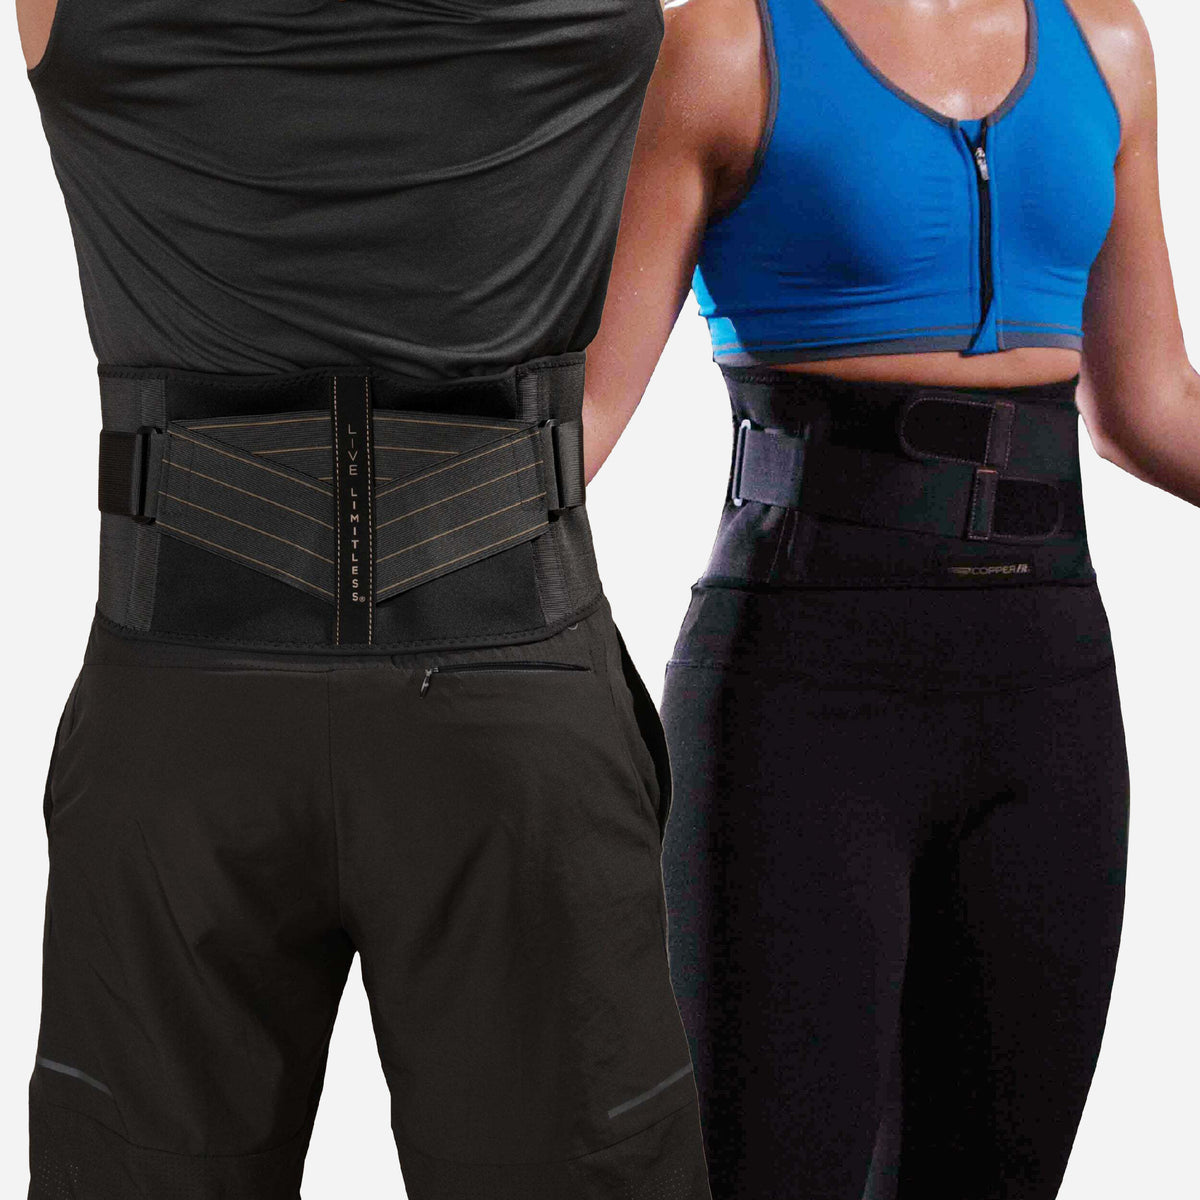 Rapid Relief Stabilizing Back Support Wraps - Copper Fit